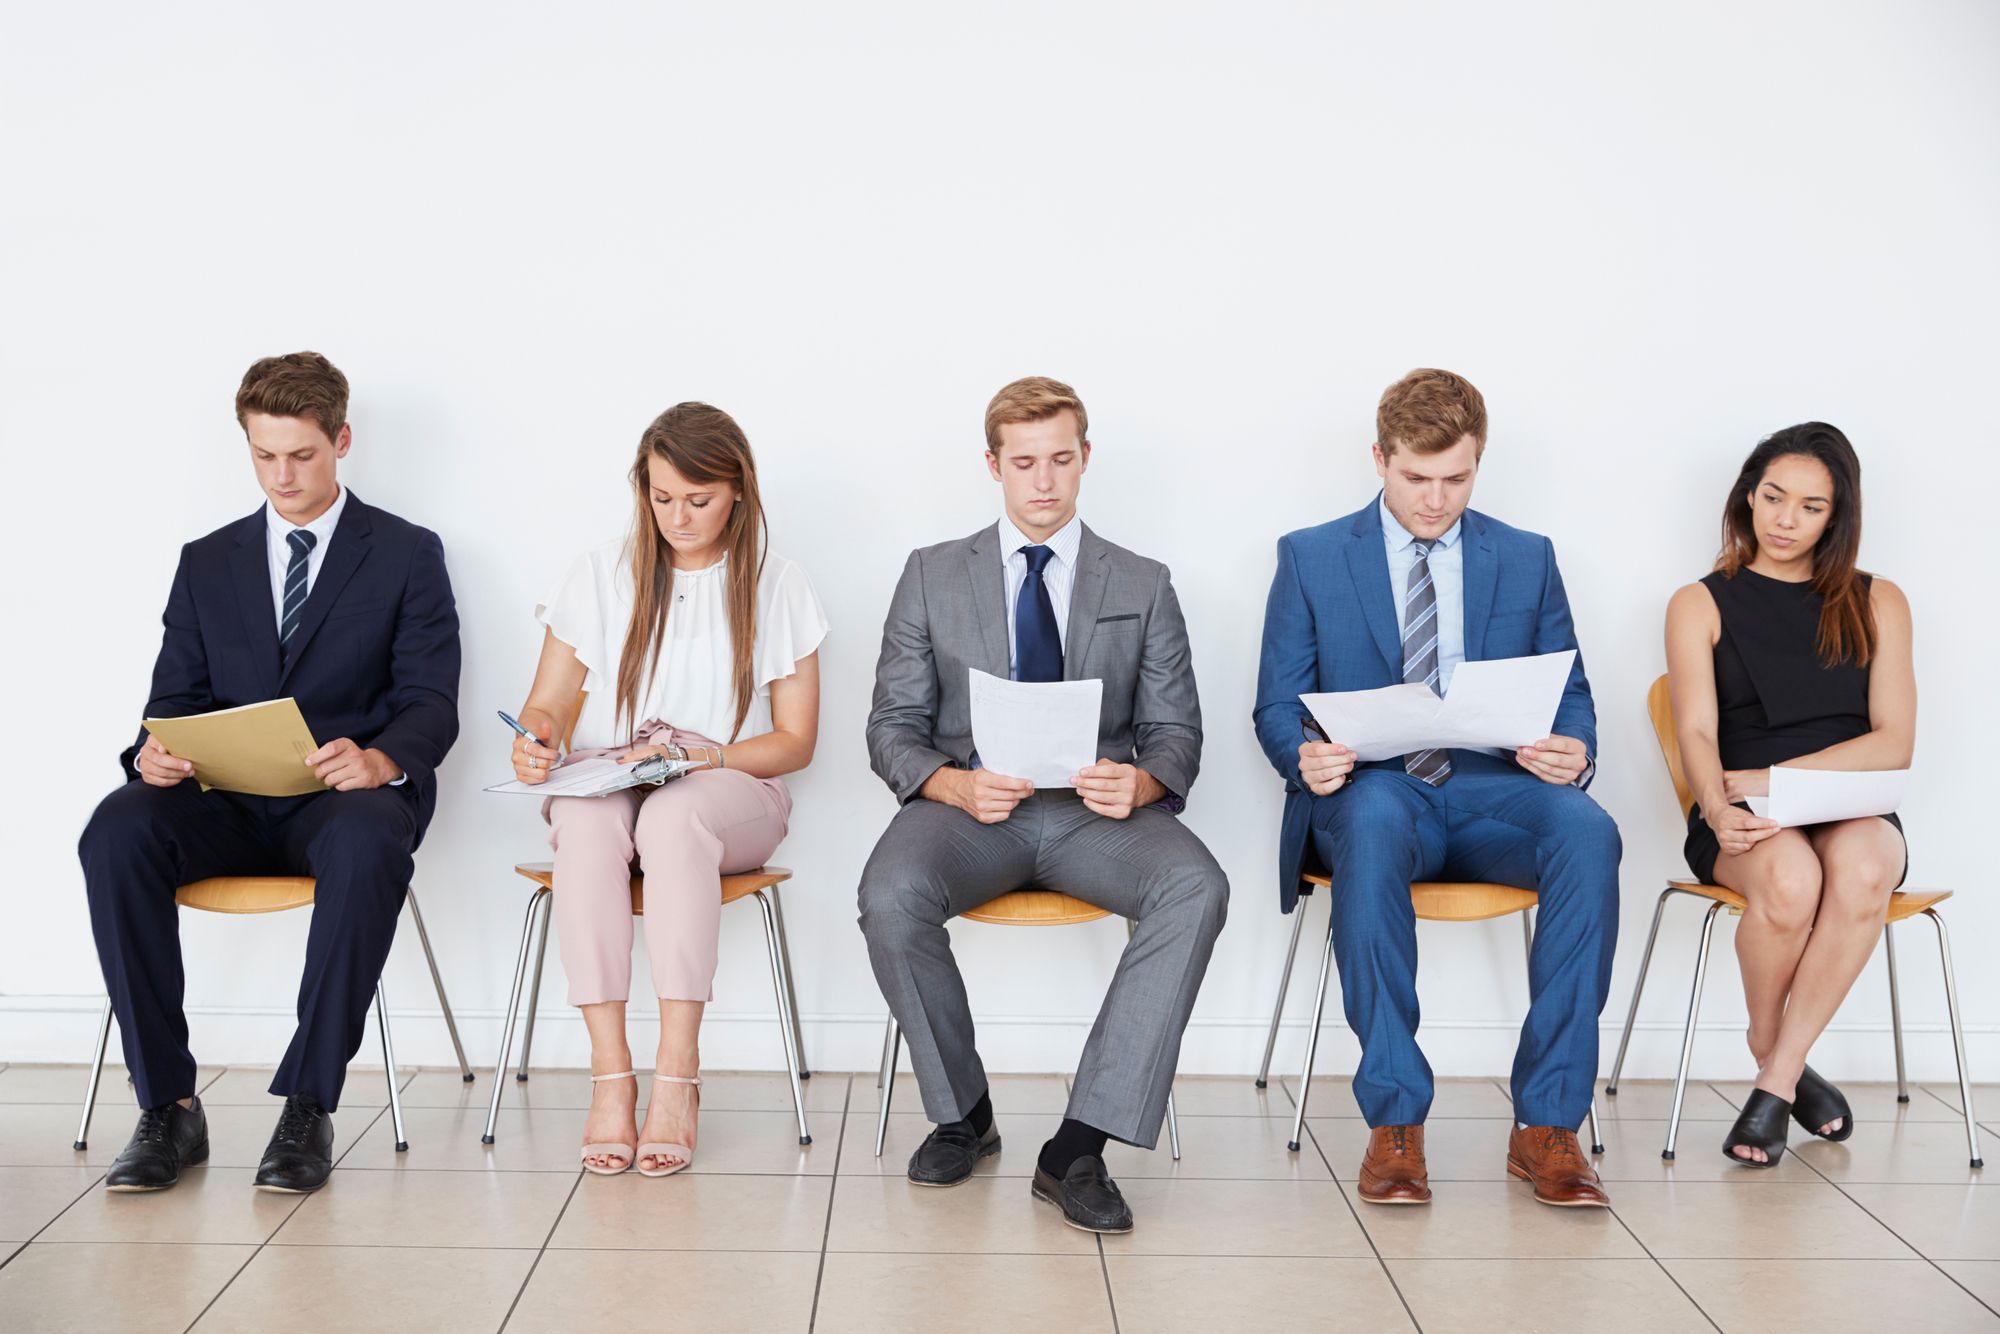 candidates-waiting-for-job-interviews-full-length--P2DXBPY